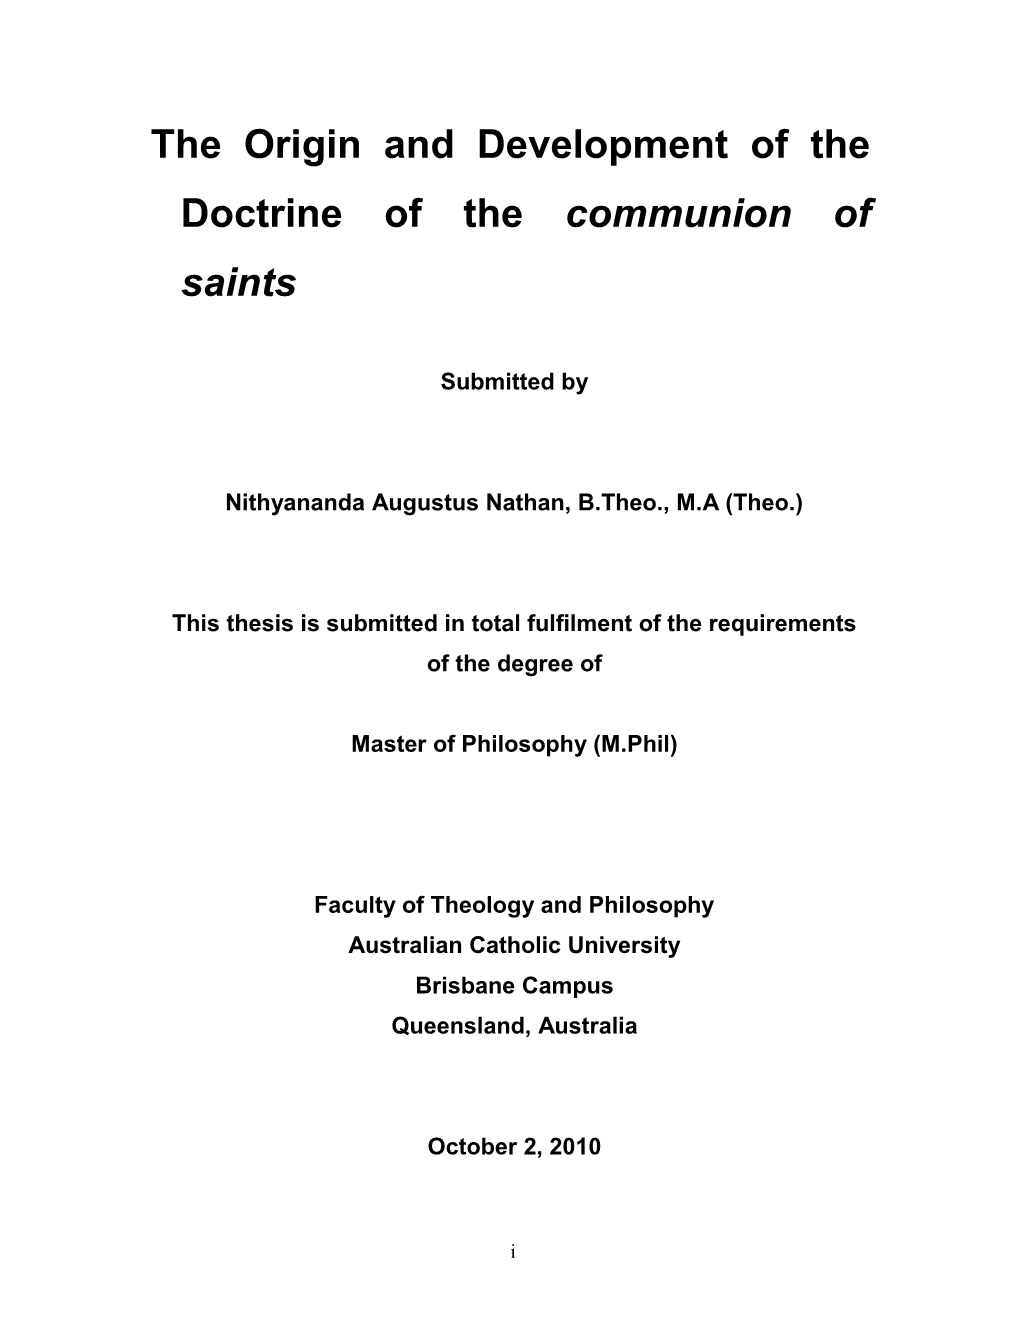 The Origin and Development of the Doctrine of the Communion of Saints